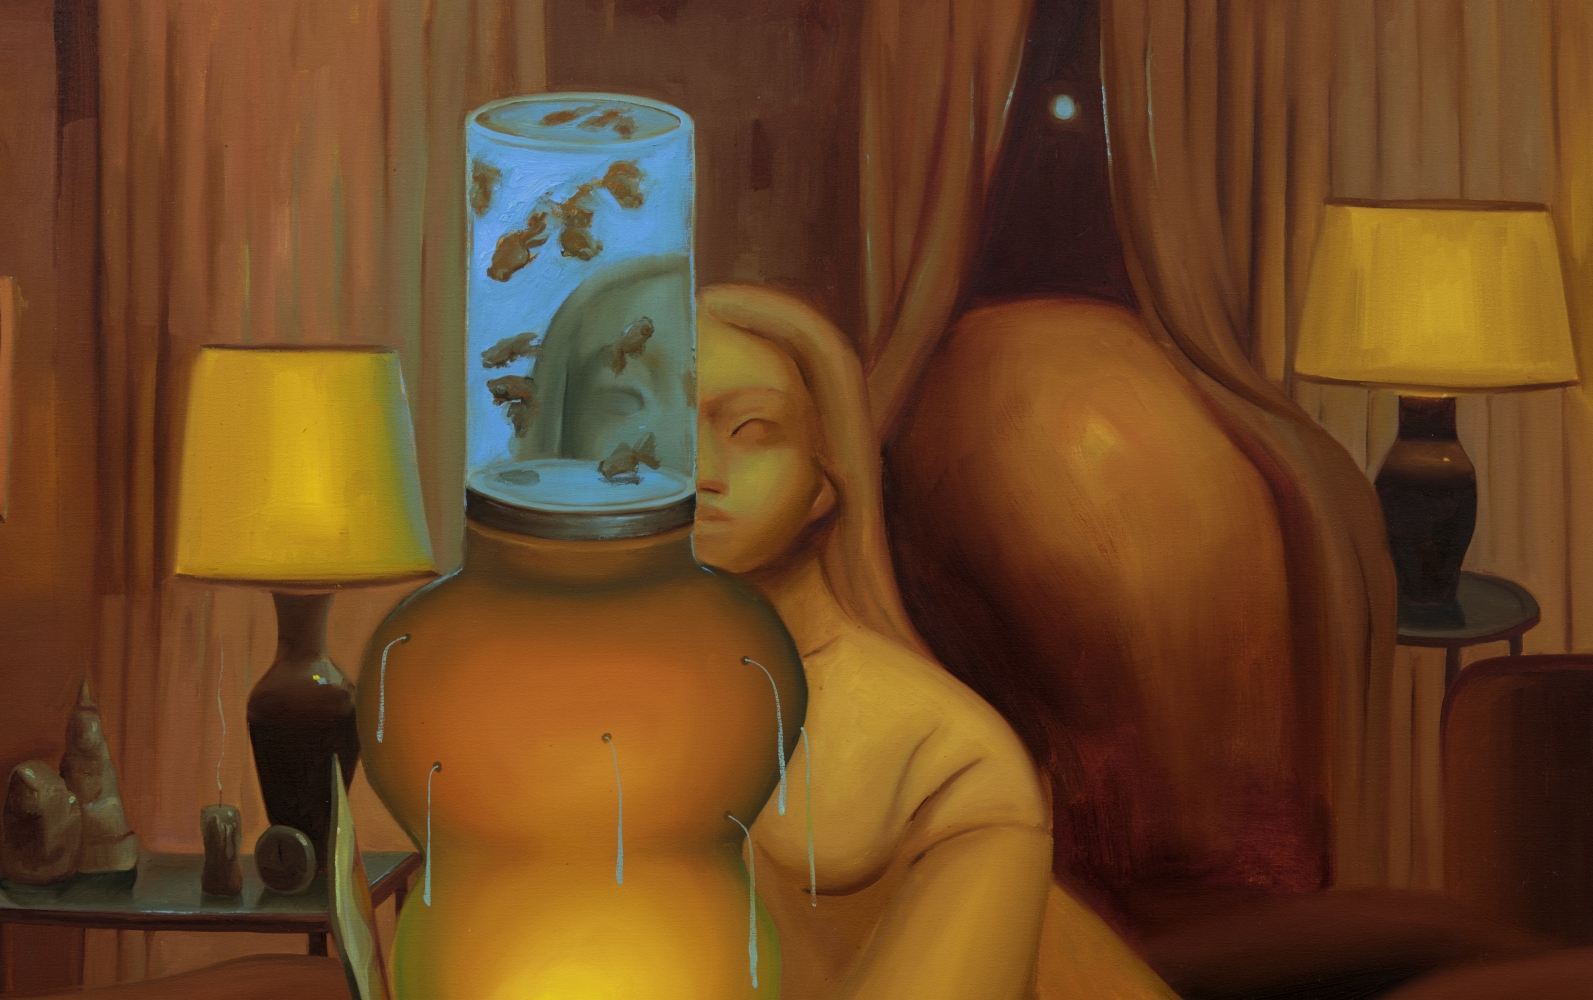 Dominique Fung
Through The Looking Glass, 2020
(detail view)